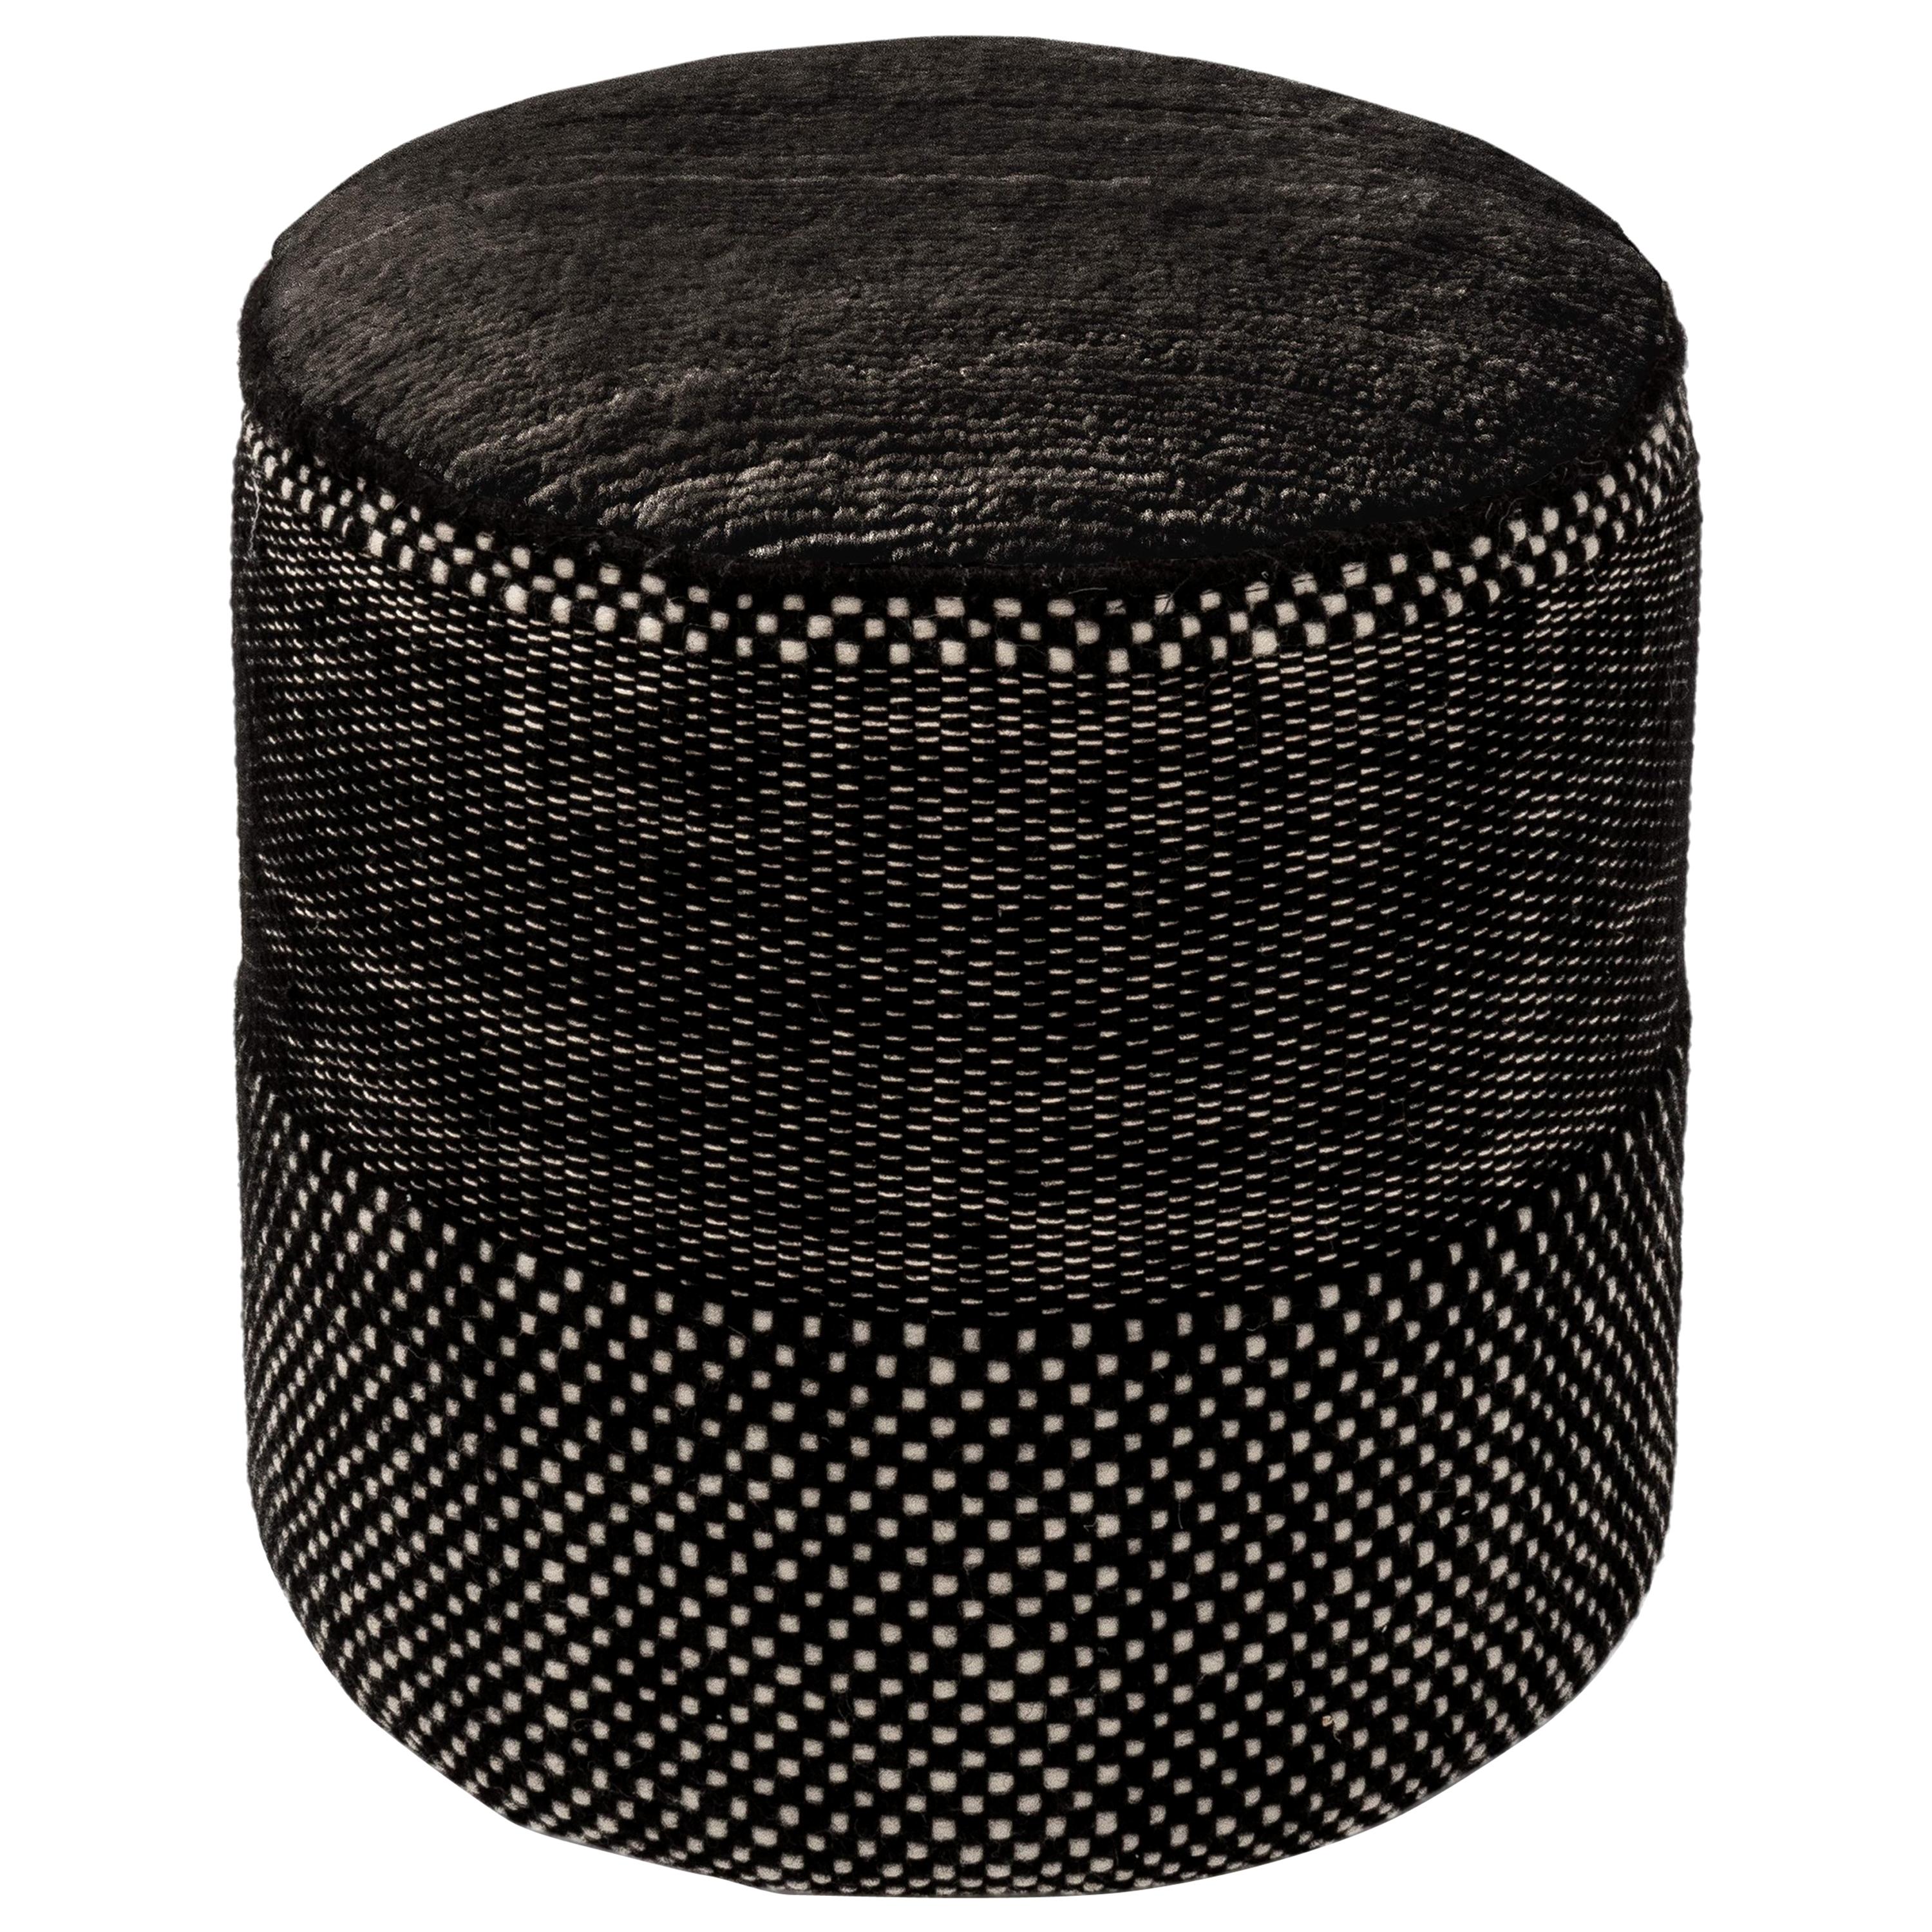 Nanimarquina Tres Persian Pouf in Black by Elisa Padron and Marcos Catalan